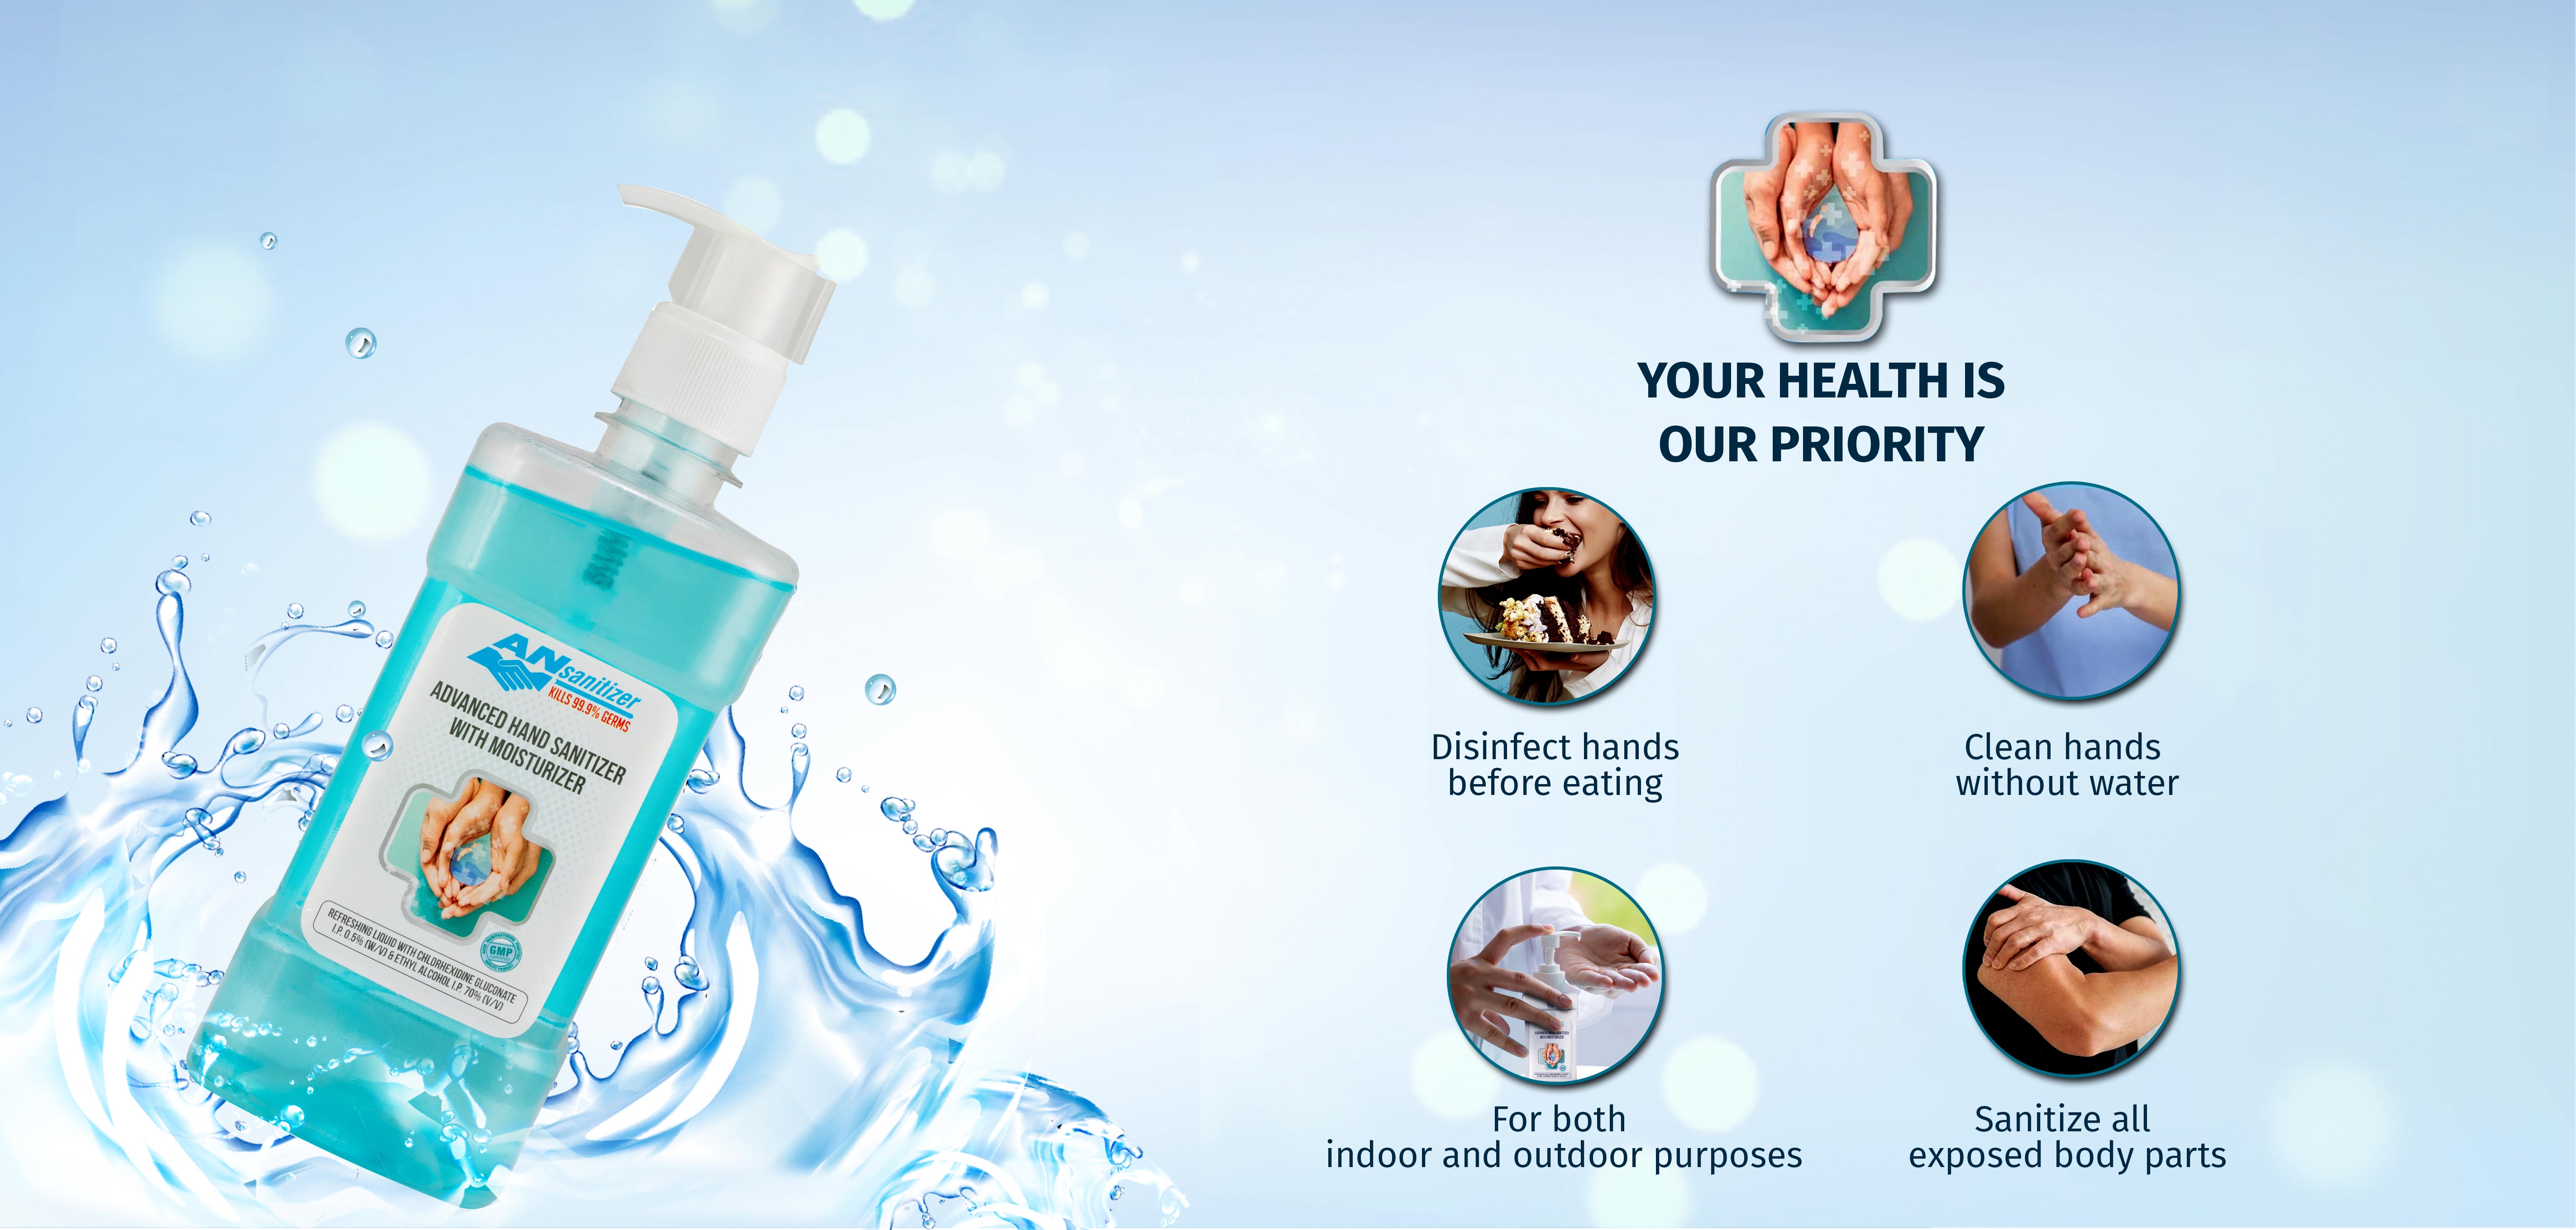 ANSANITIZER, ADVANCED HAND SANITIZER WITH MOISTURIZER - Your Health is Our Priority